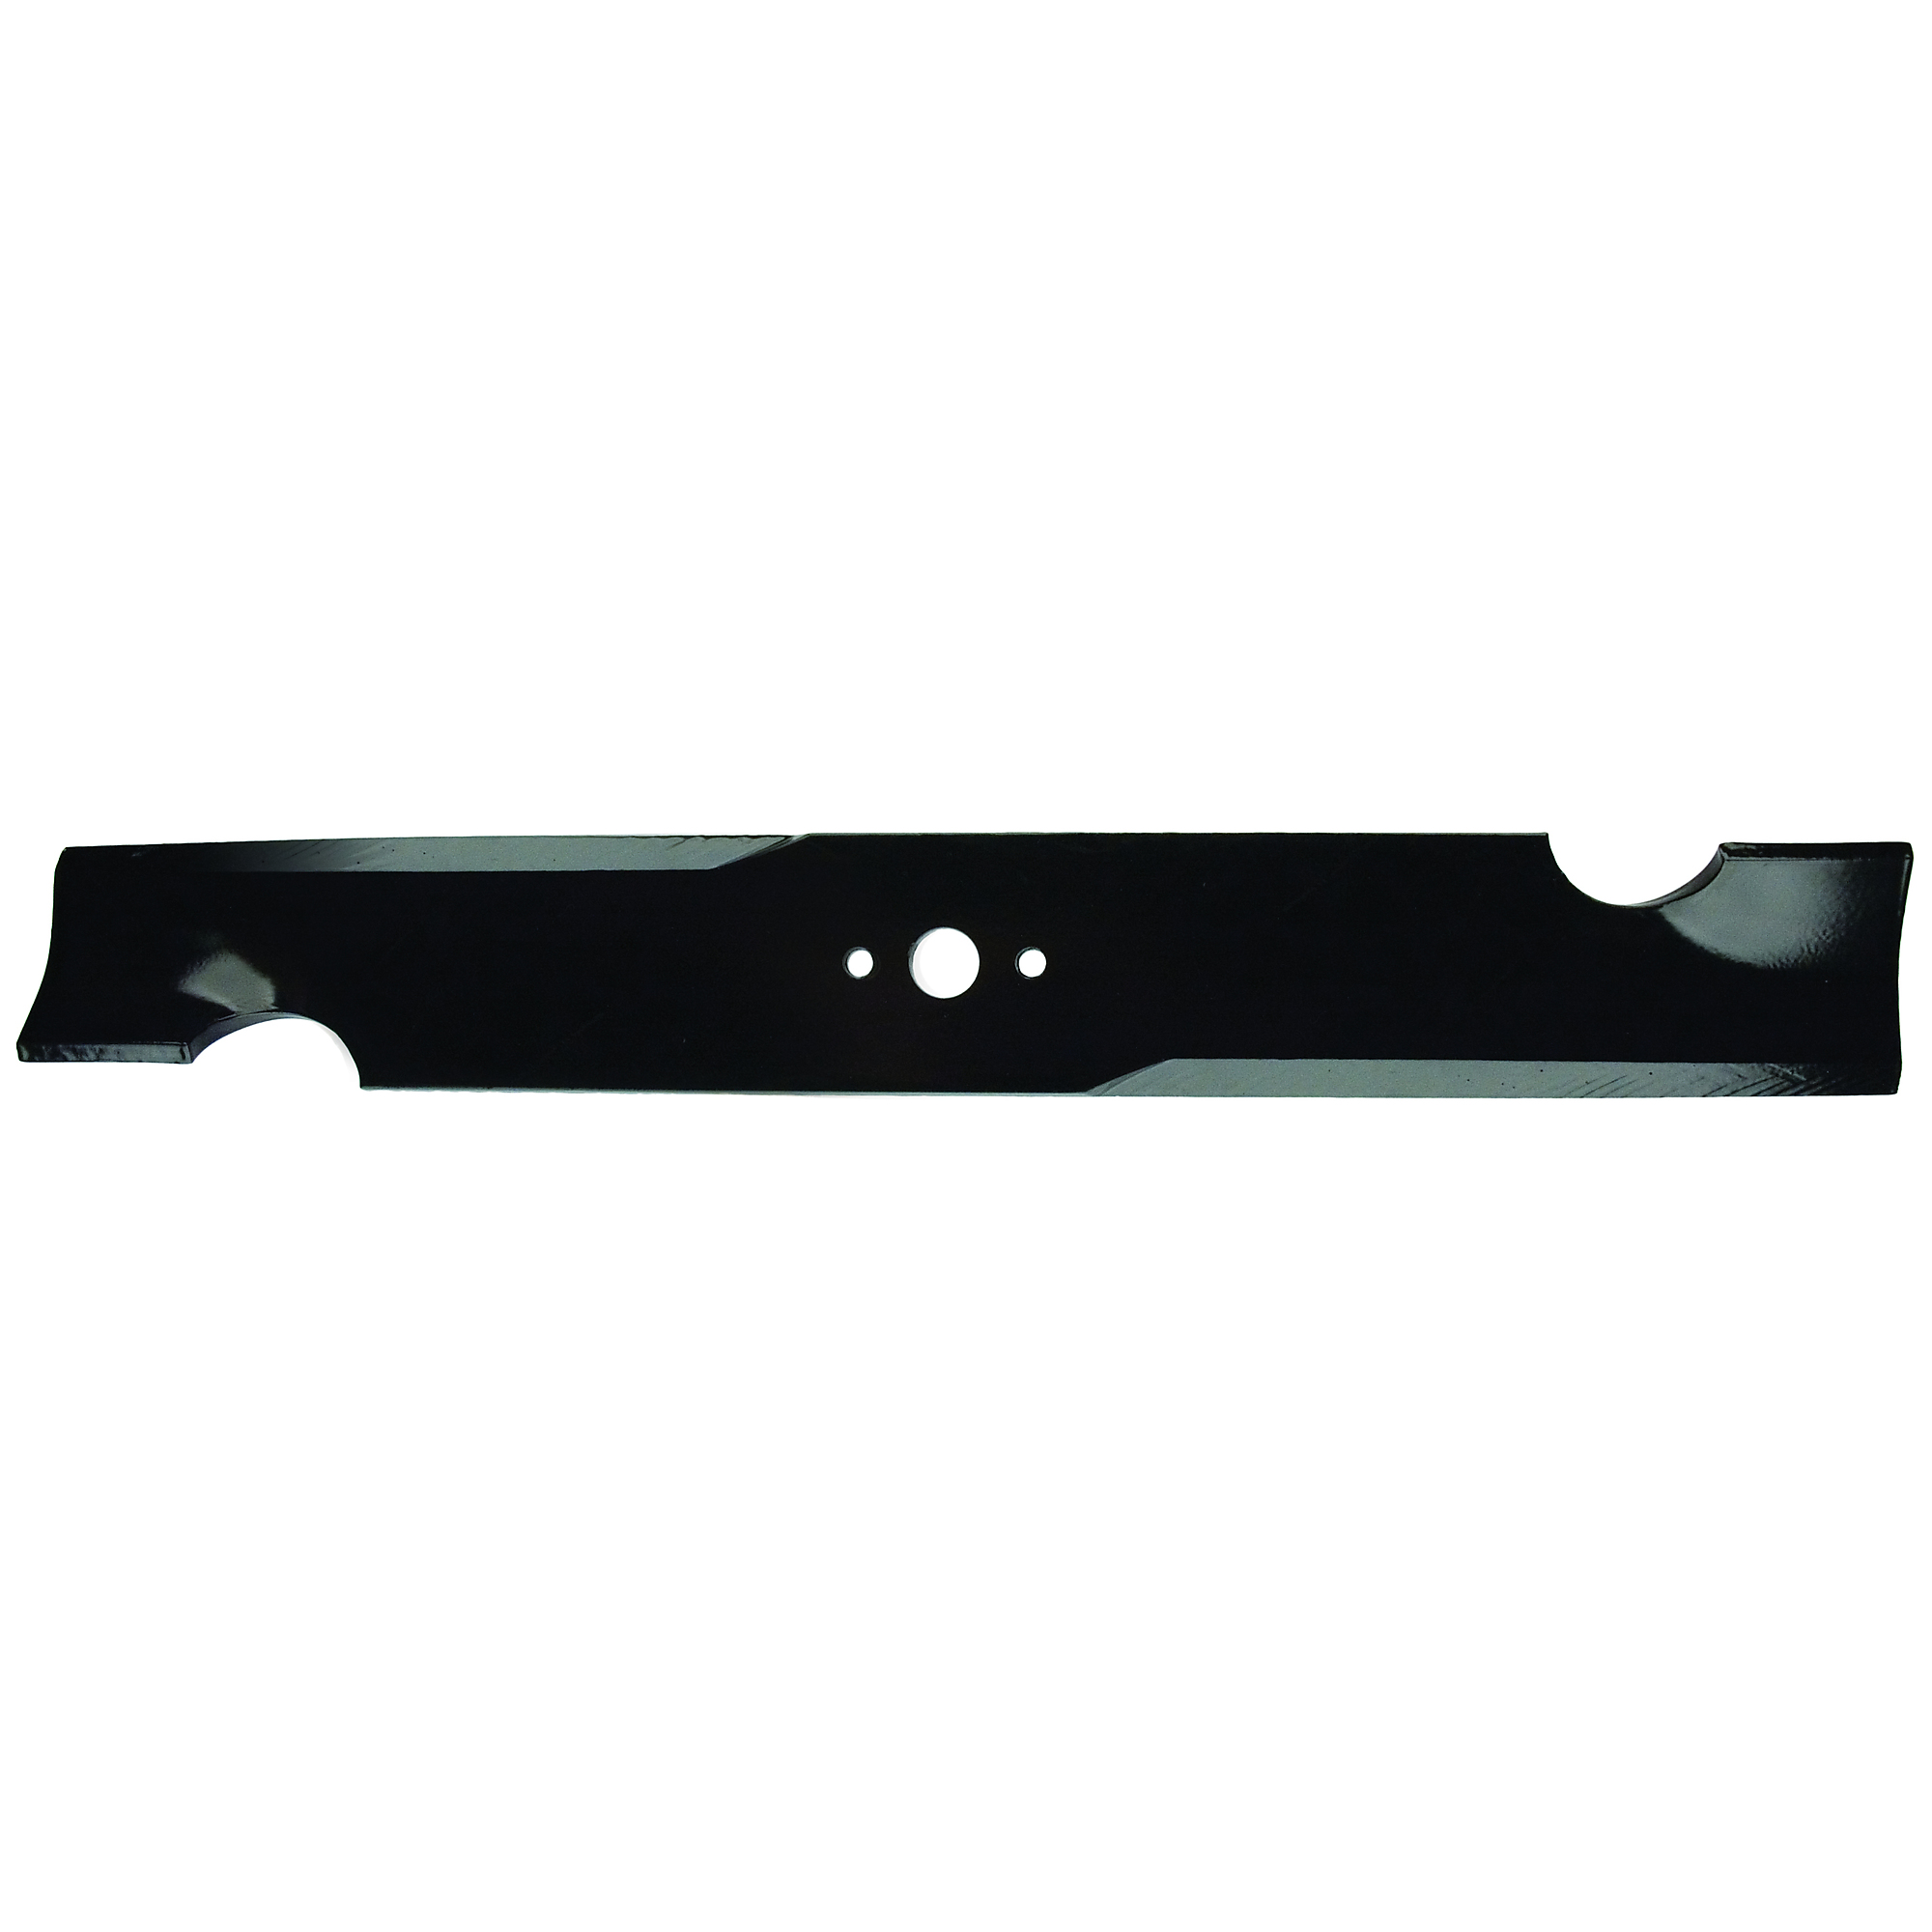 Oregon, Replacement Lawn Mower Blade, Length 18 in, Model 93-006